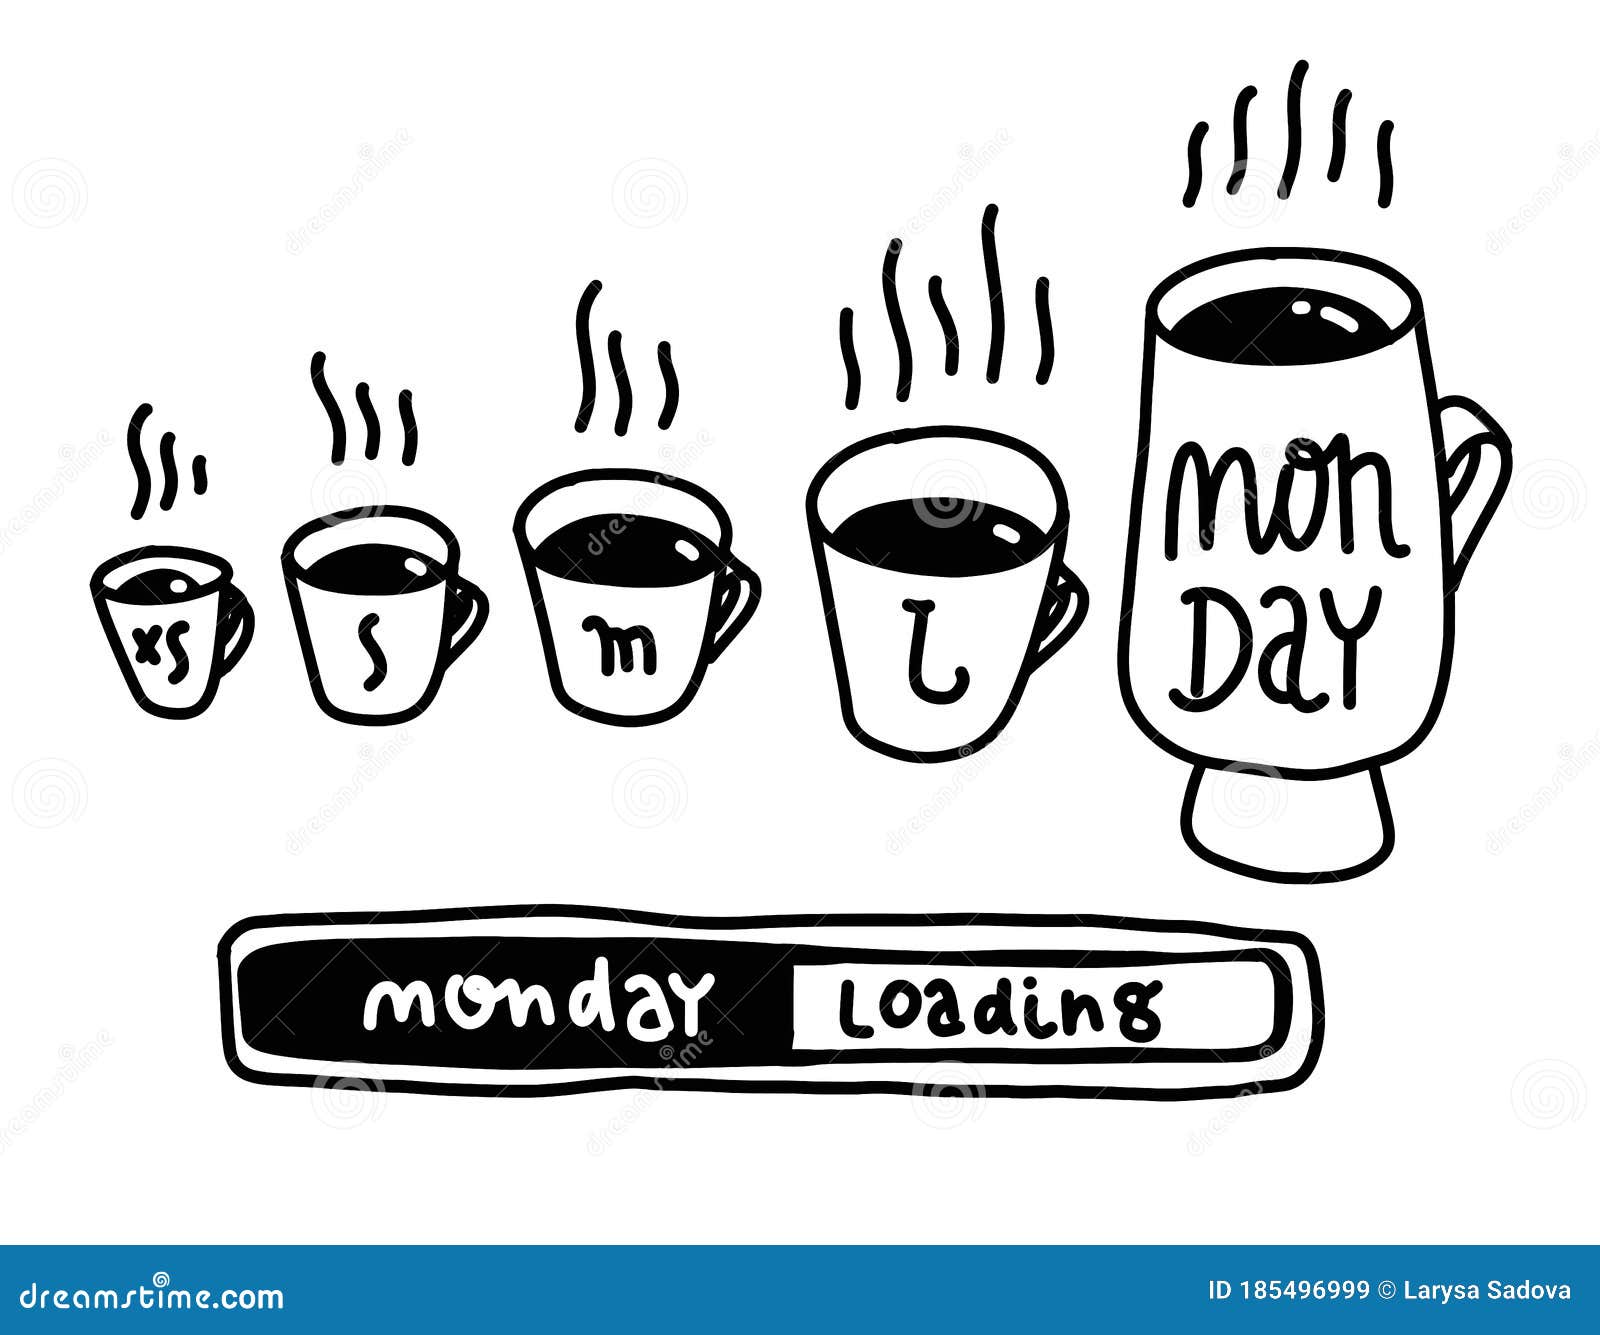 monday morning coffee images